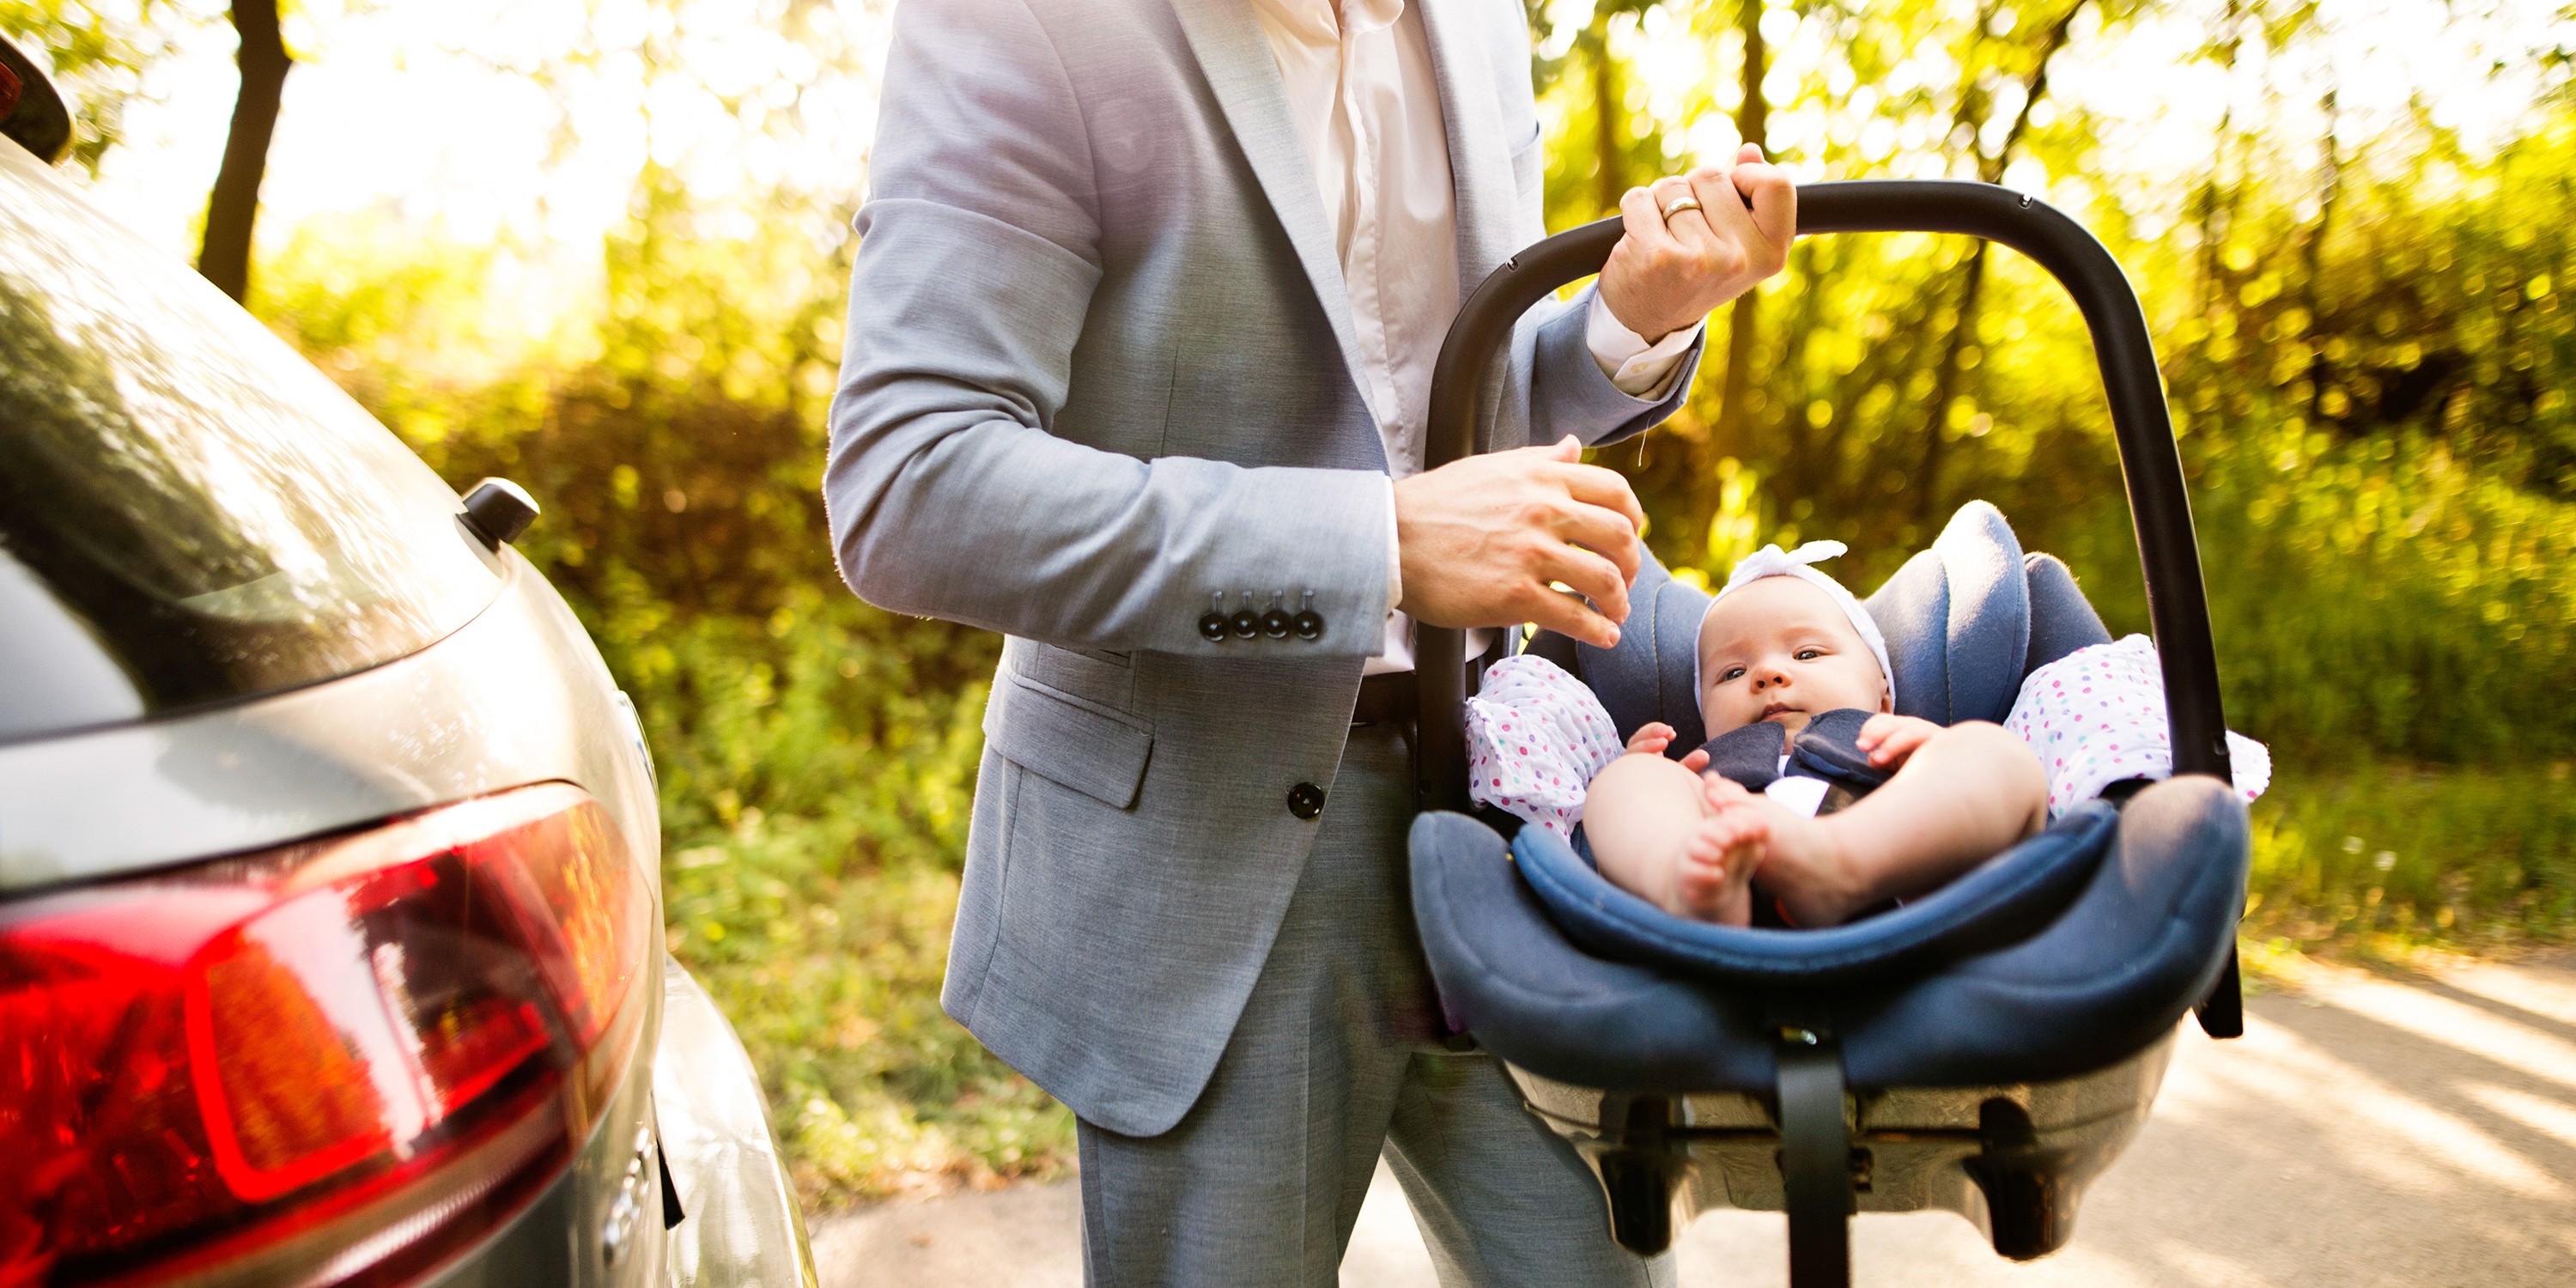 https://assets.goaaa.com/image/upload/w_auto,q_auto:best,f_auto/v1647566465/singularity-migrated-images/how-clean-child-car-seat-via-magazine-aaa-shutterstock_726218233.jpg.jpg